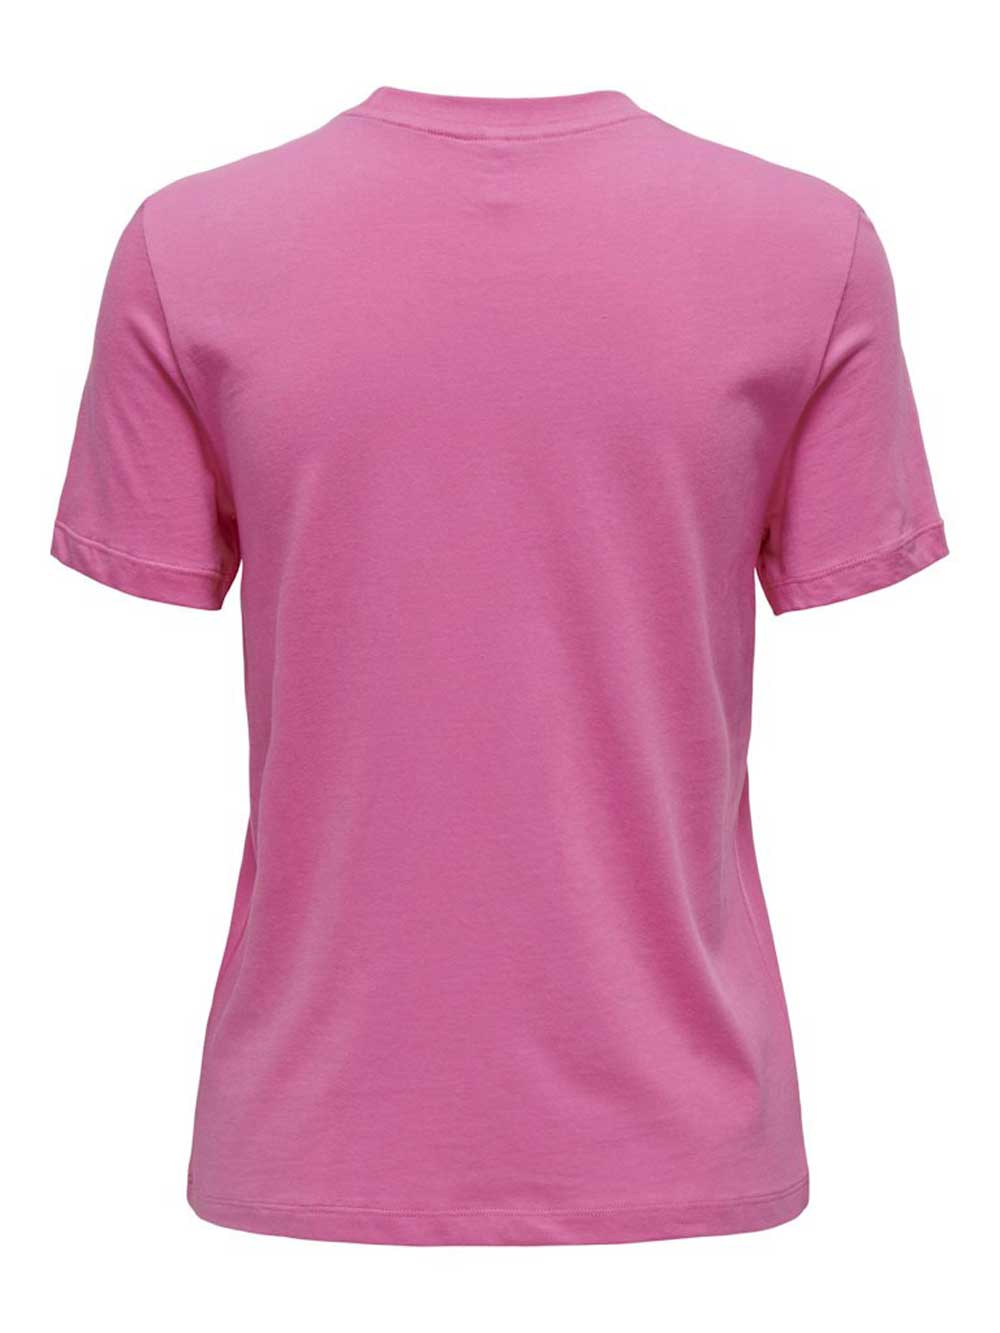 ONLY T-shirts e Tops ONLY da DONNA - rosa